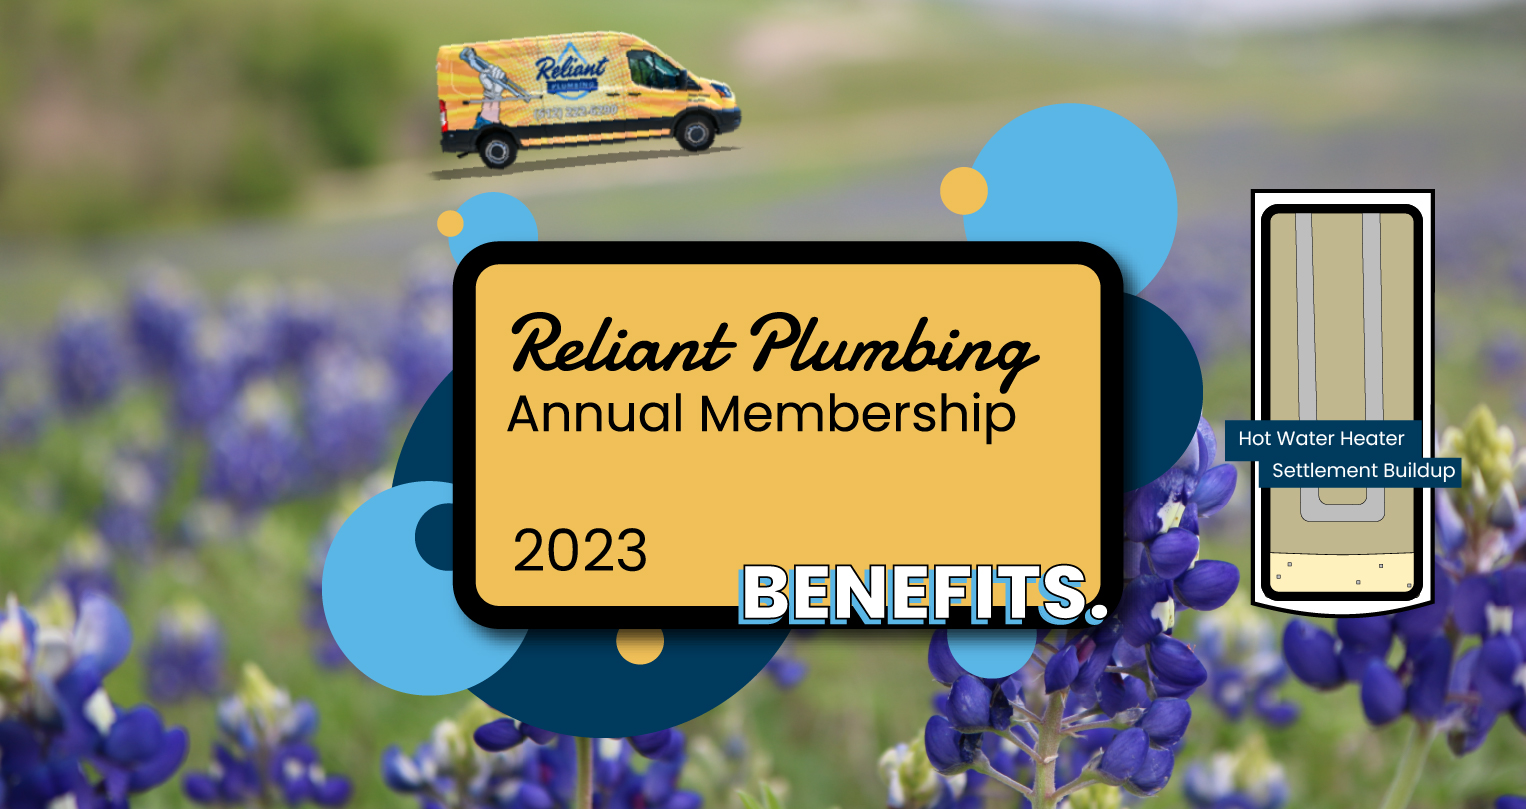 bluebonnets in the background with a yellow company vehicle driving on a road. text reads Reliant Plumbing annual membership 2023 benefits. on right, illustration of a hot water heater with sediment.